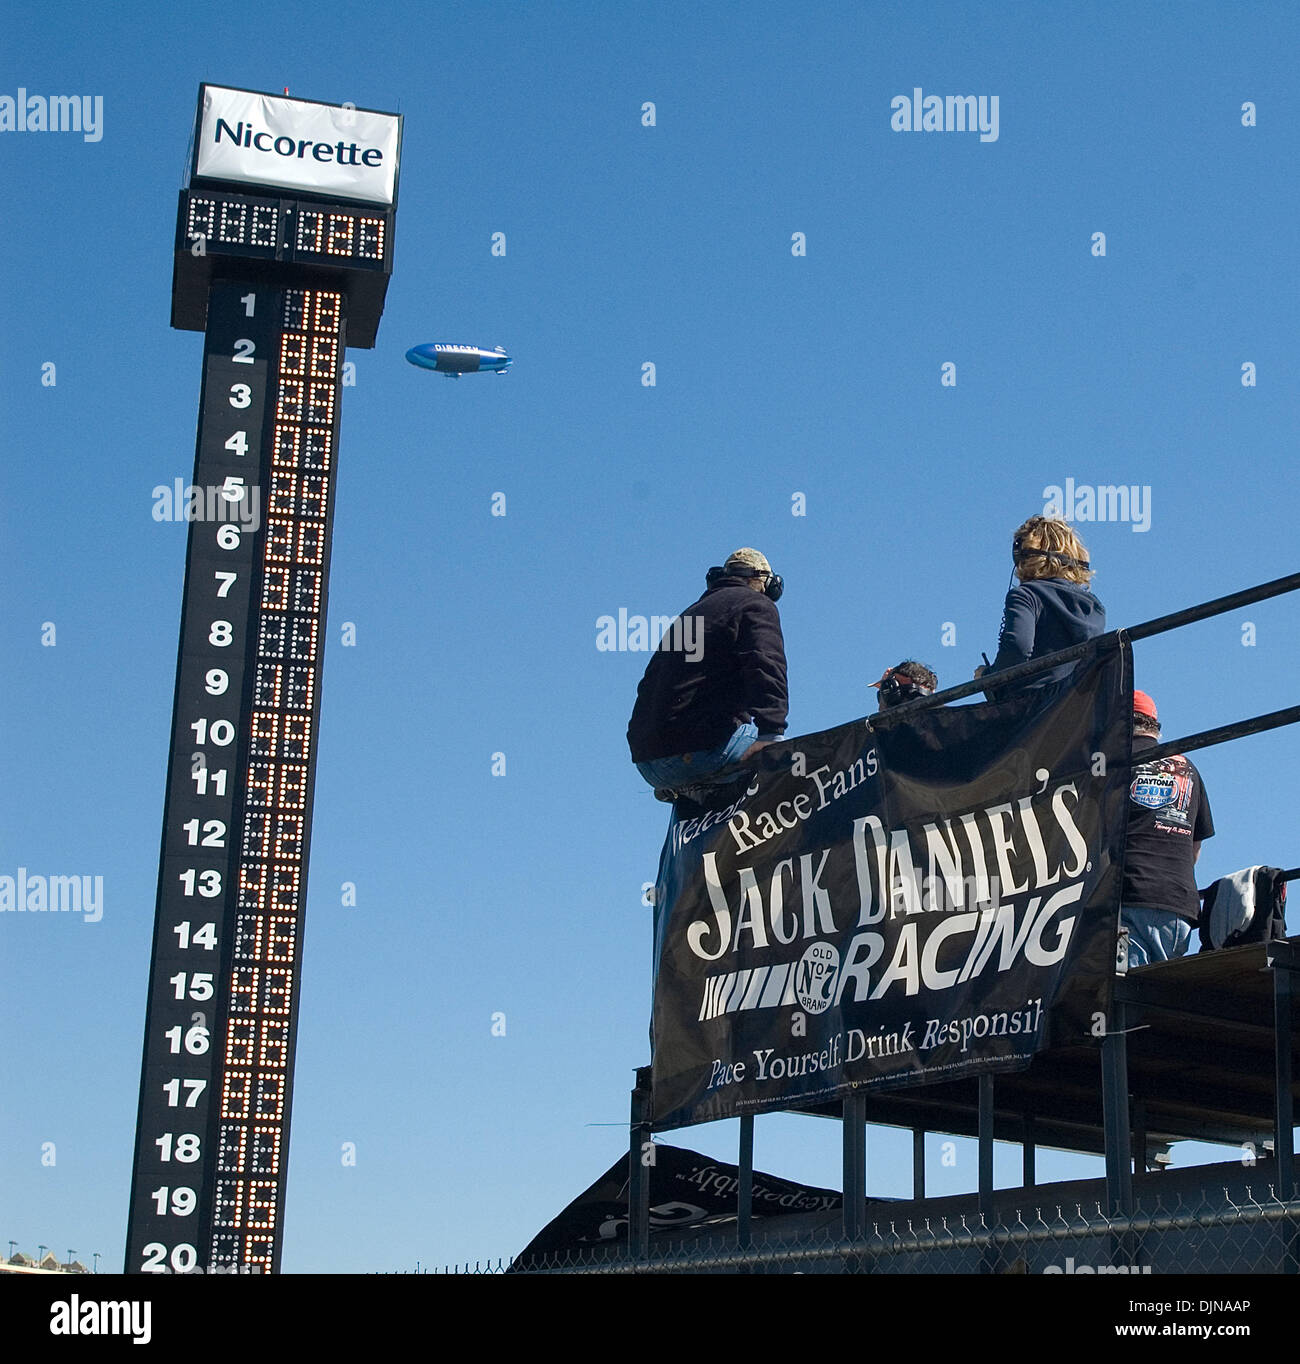 Mar 09, 2008 - Hampton, Georgia, USA - Fans watch the running of the Kobalt Tools 500 at Atlanta Motor Speedway on Sunday, March 9, 2008 as the Direct TV blimp flies overhead. (Credit Image: © Timothy L. Hale/ZUMA Press) Stock Photo